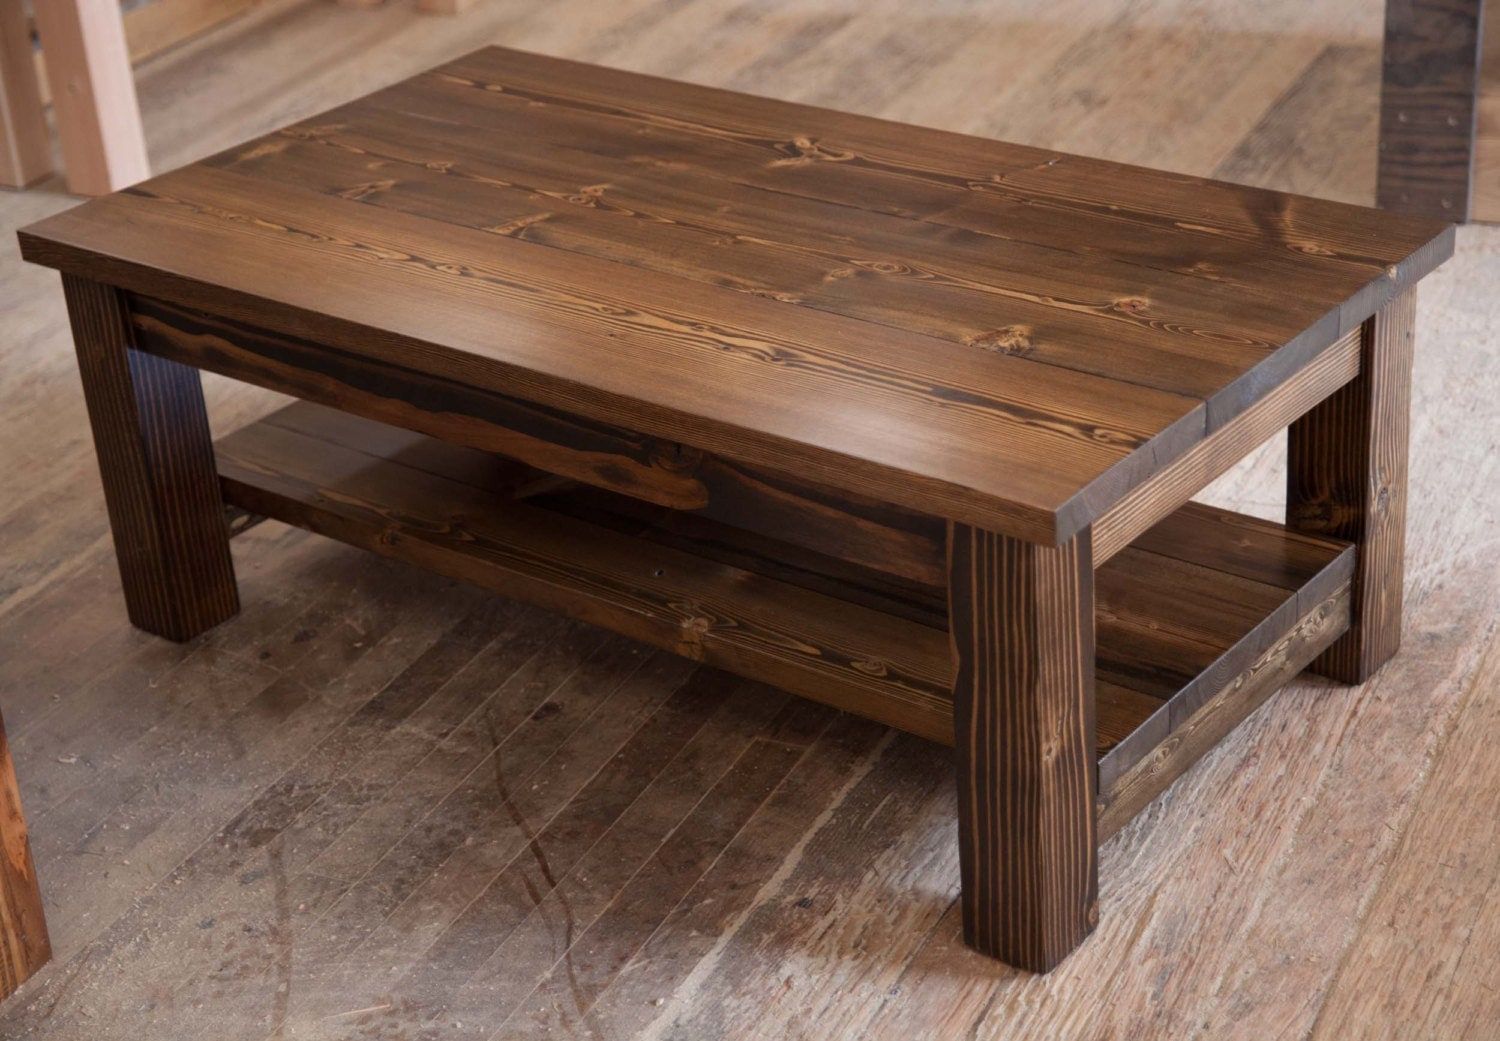 Farmhouse Coffee Table Rustic Coffee Table Solid Wood Intended For Rustic Wood Coffee Tables (View 14 of 21)